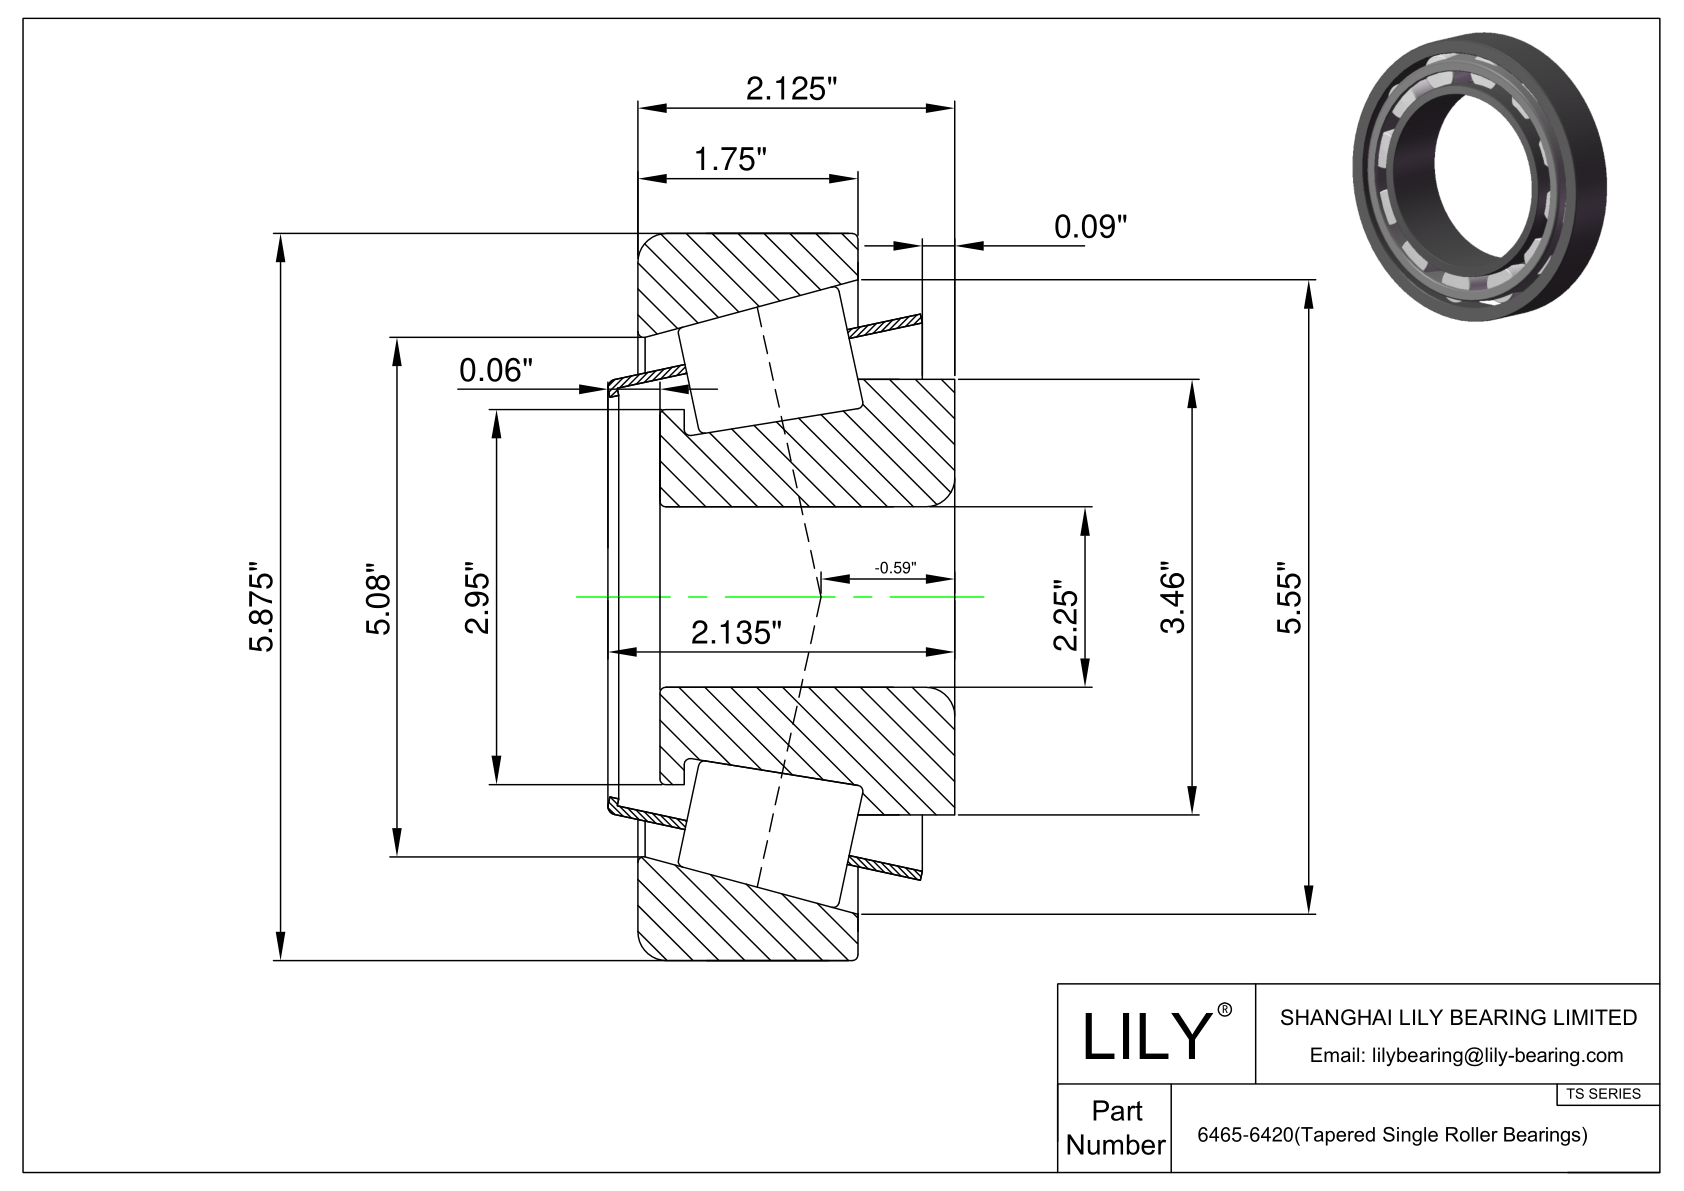 6465-6420 TS (Tapered Single Roller Bearings) (Imperial) cad drawing